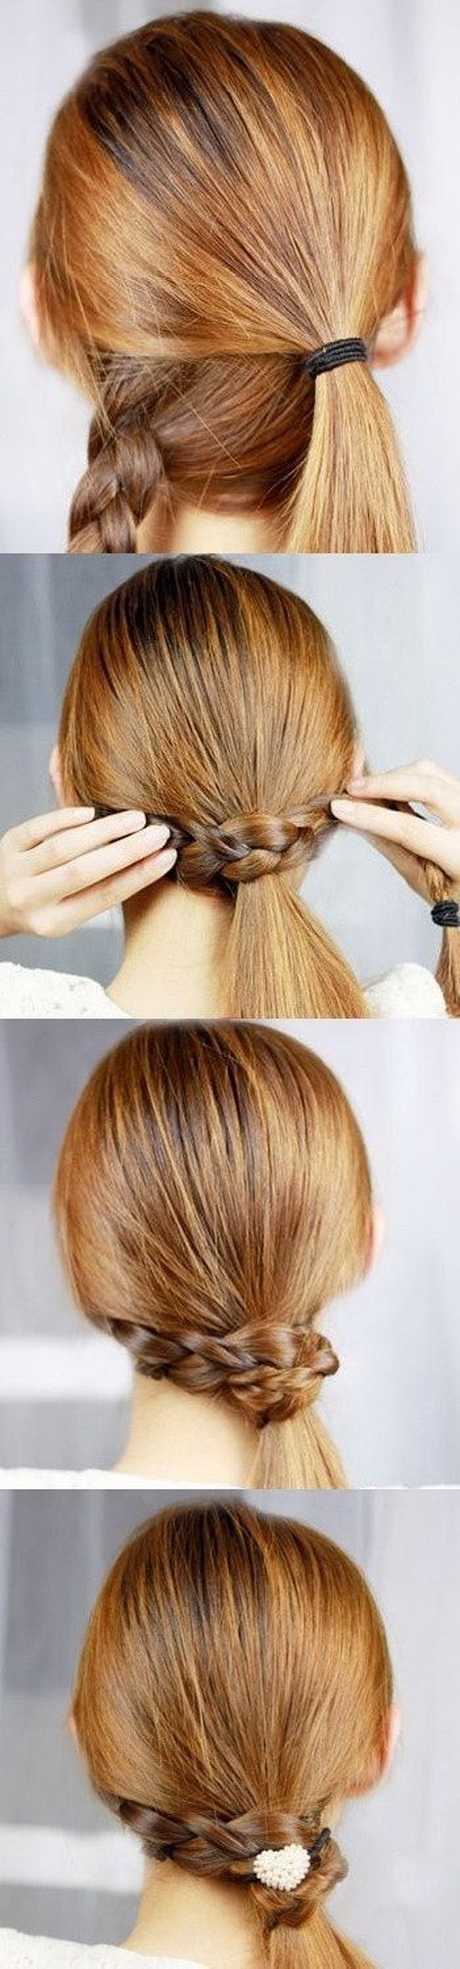 Easy hairstyles for long hair to do at home easy-hairstyles-for-long-hair-to-do-at-home-89